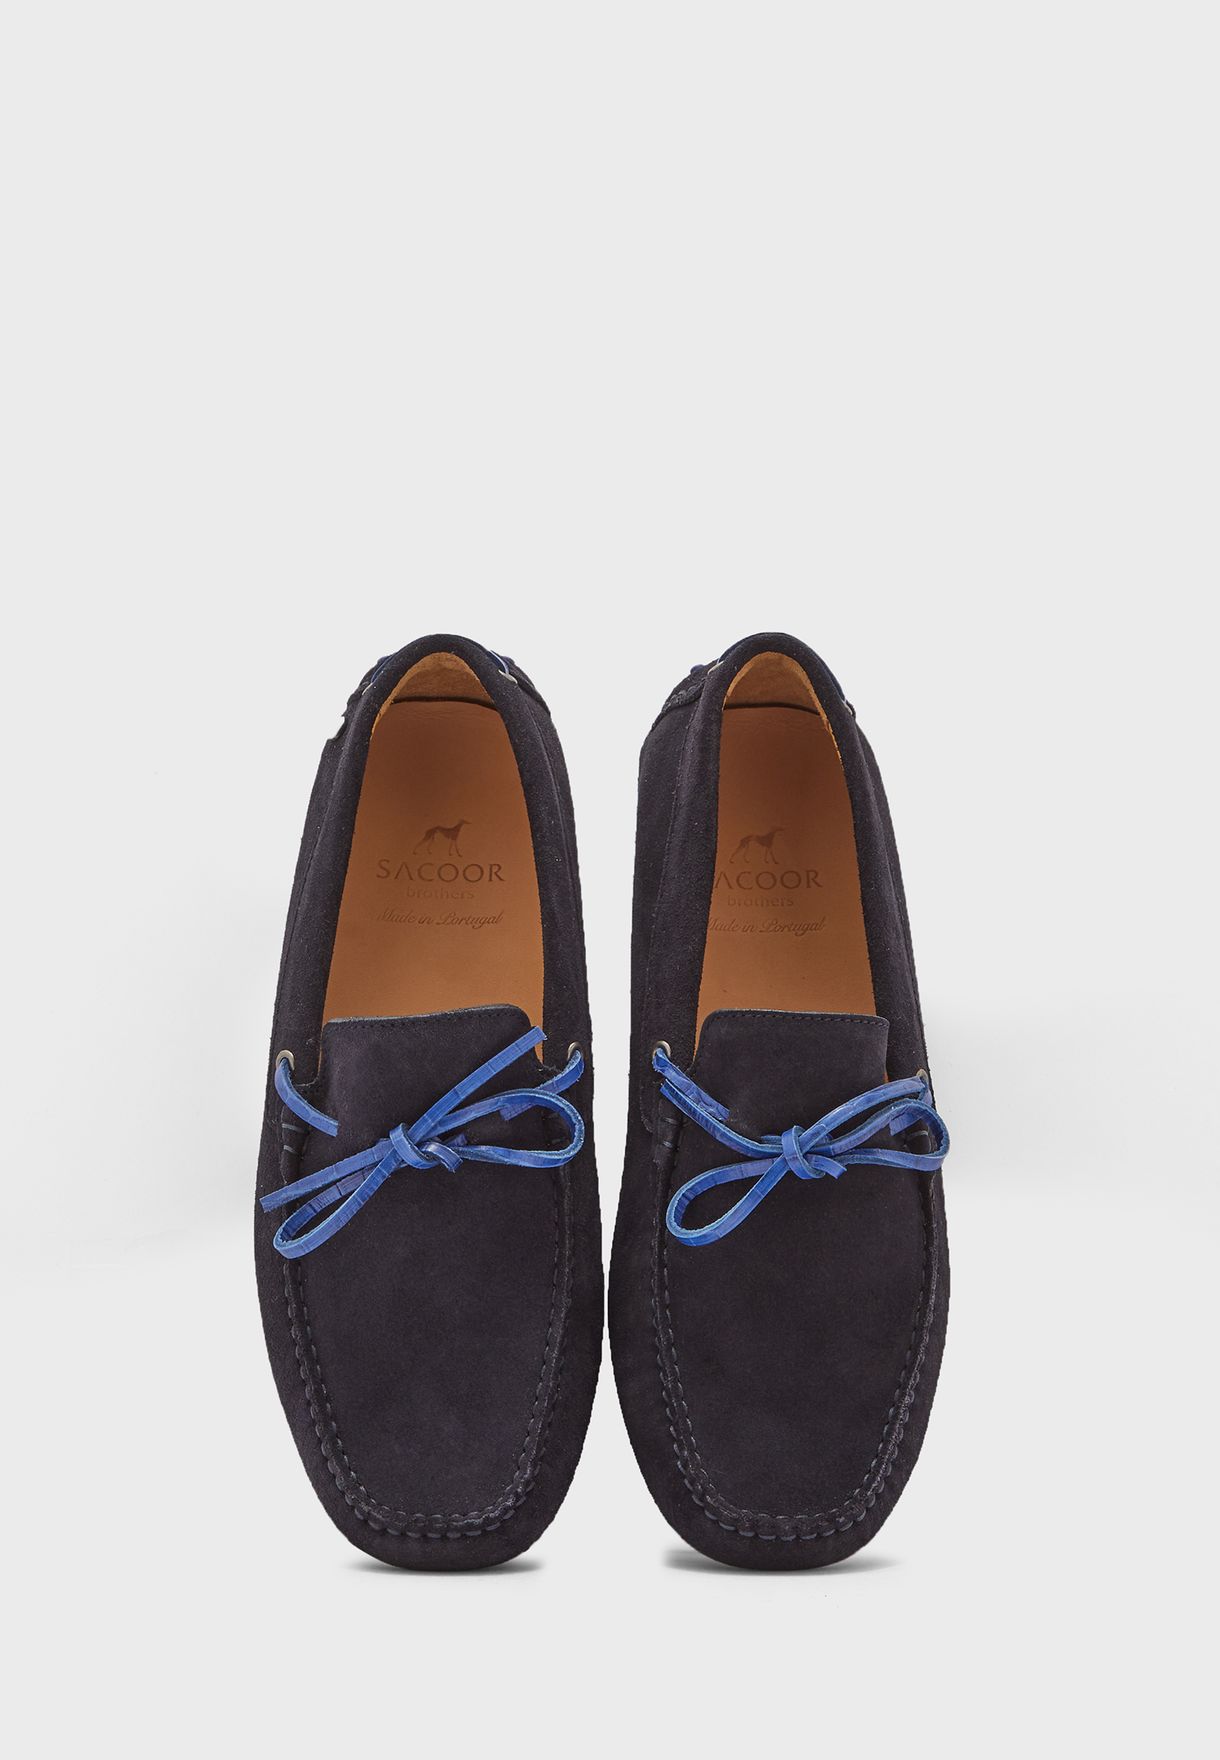 Slip Ons Loafers & Moccasins